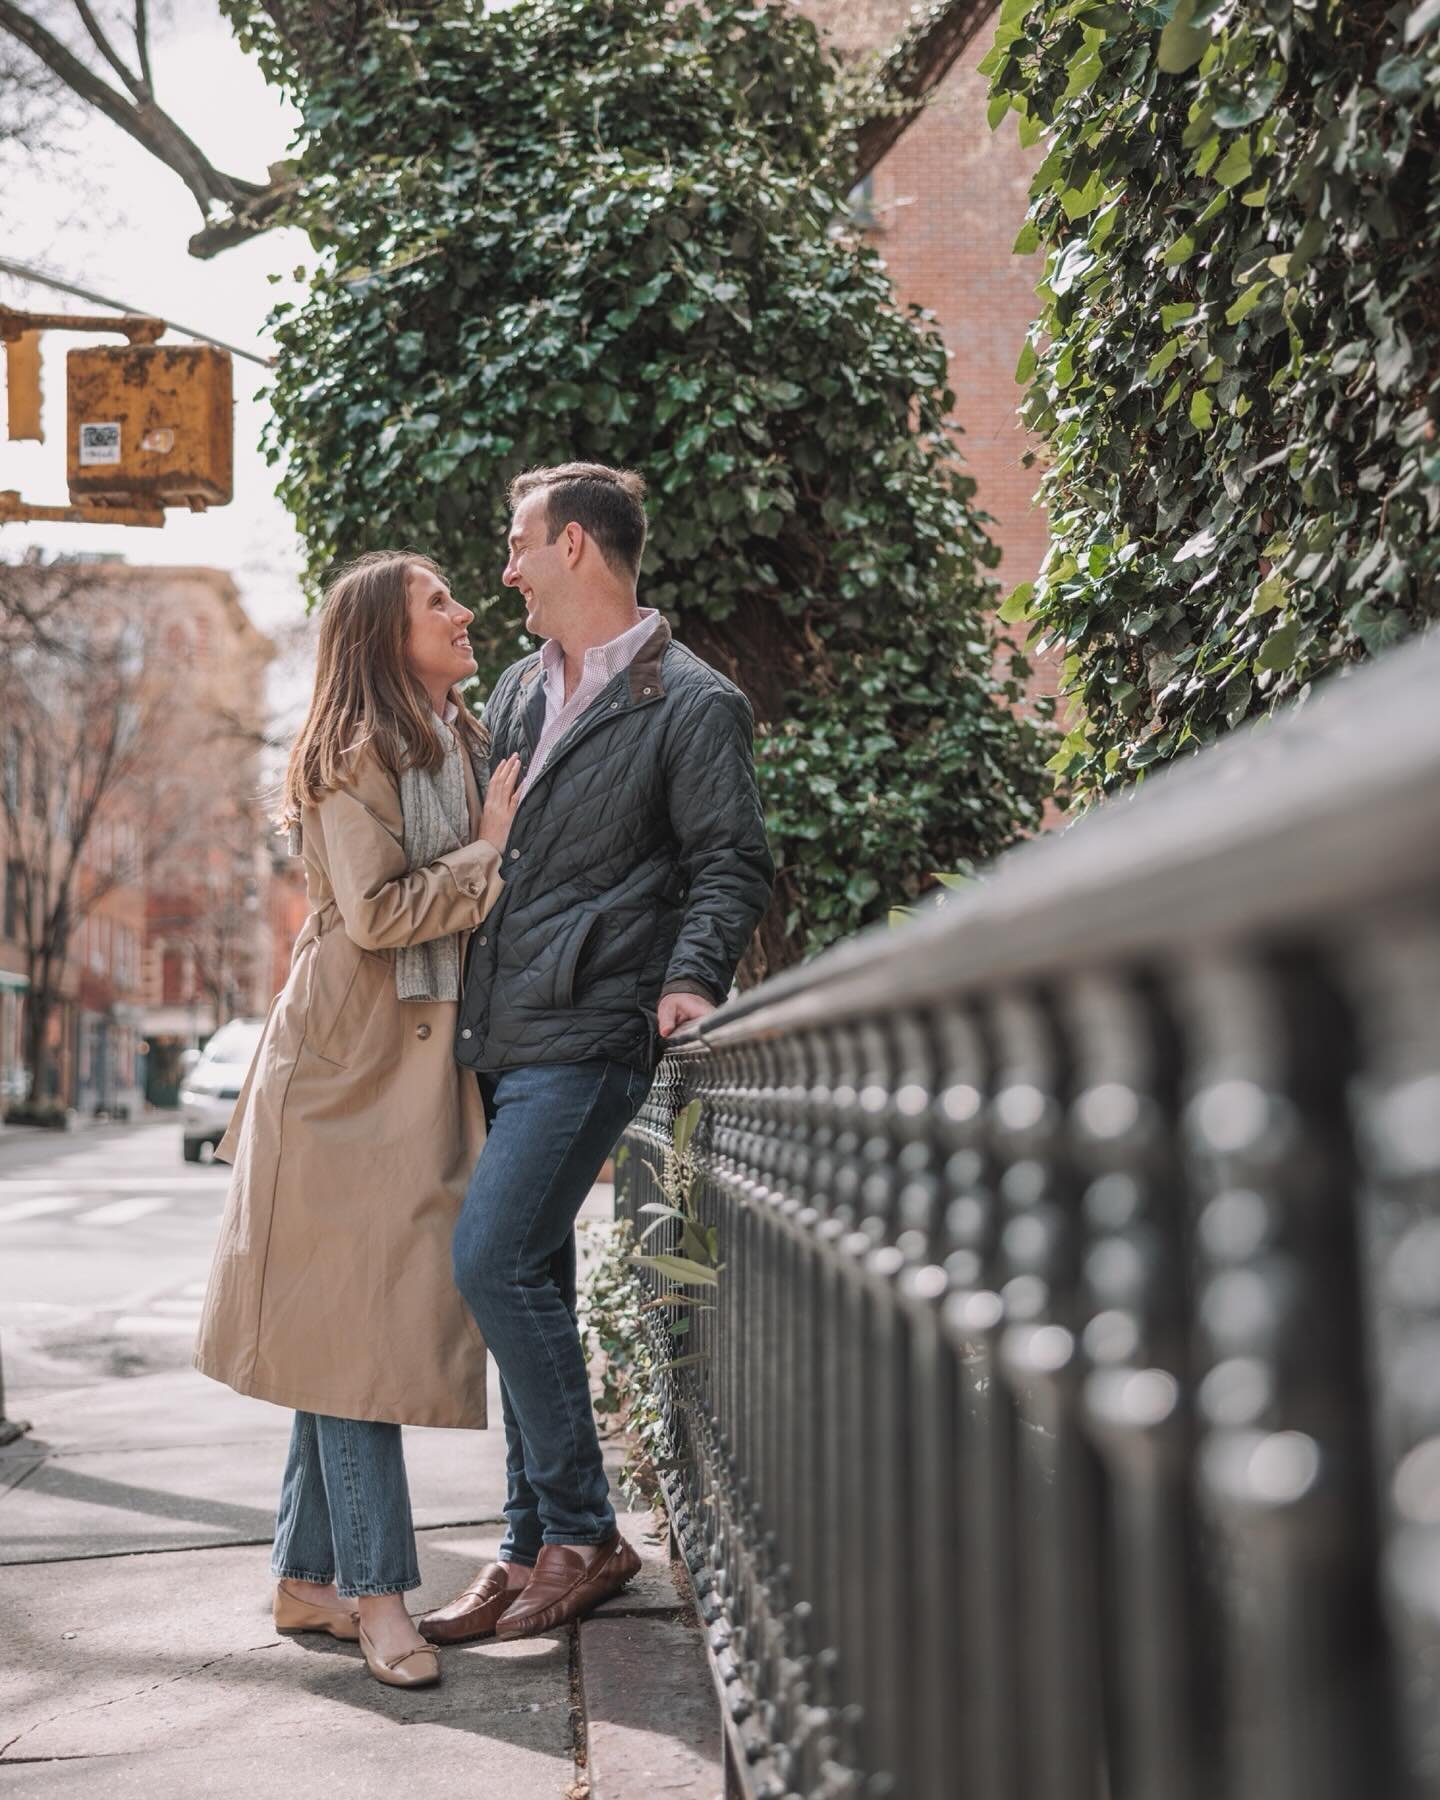 When you get engaged in New York, it simply turns into a New York moment. That&rsquo;s just what happens, there&rsquo;s no avoiding it. 🌇✨